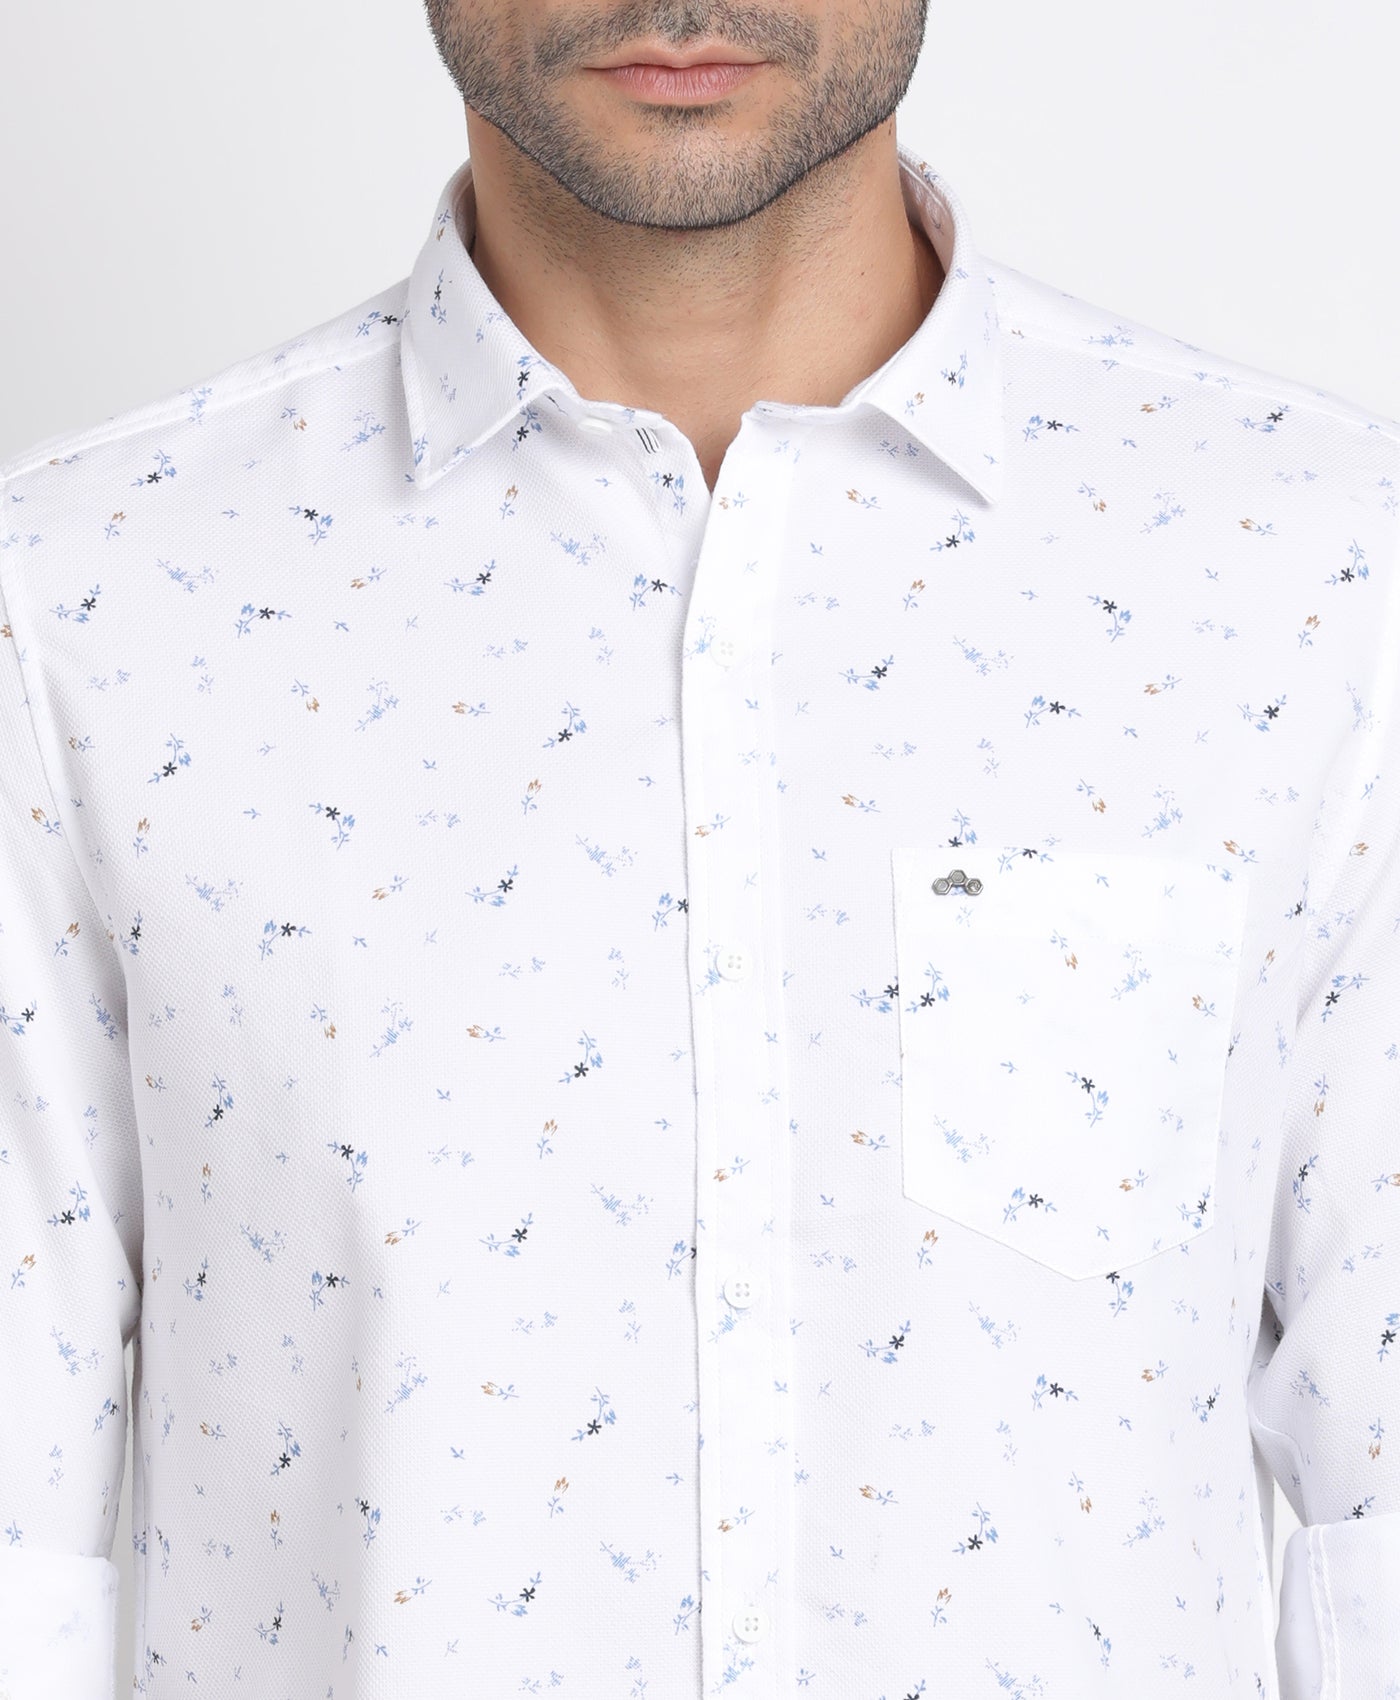 Poly Cotton White Printed Slim Fit Full Sleeve Casual Shirt